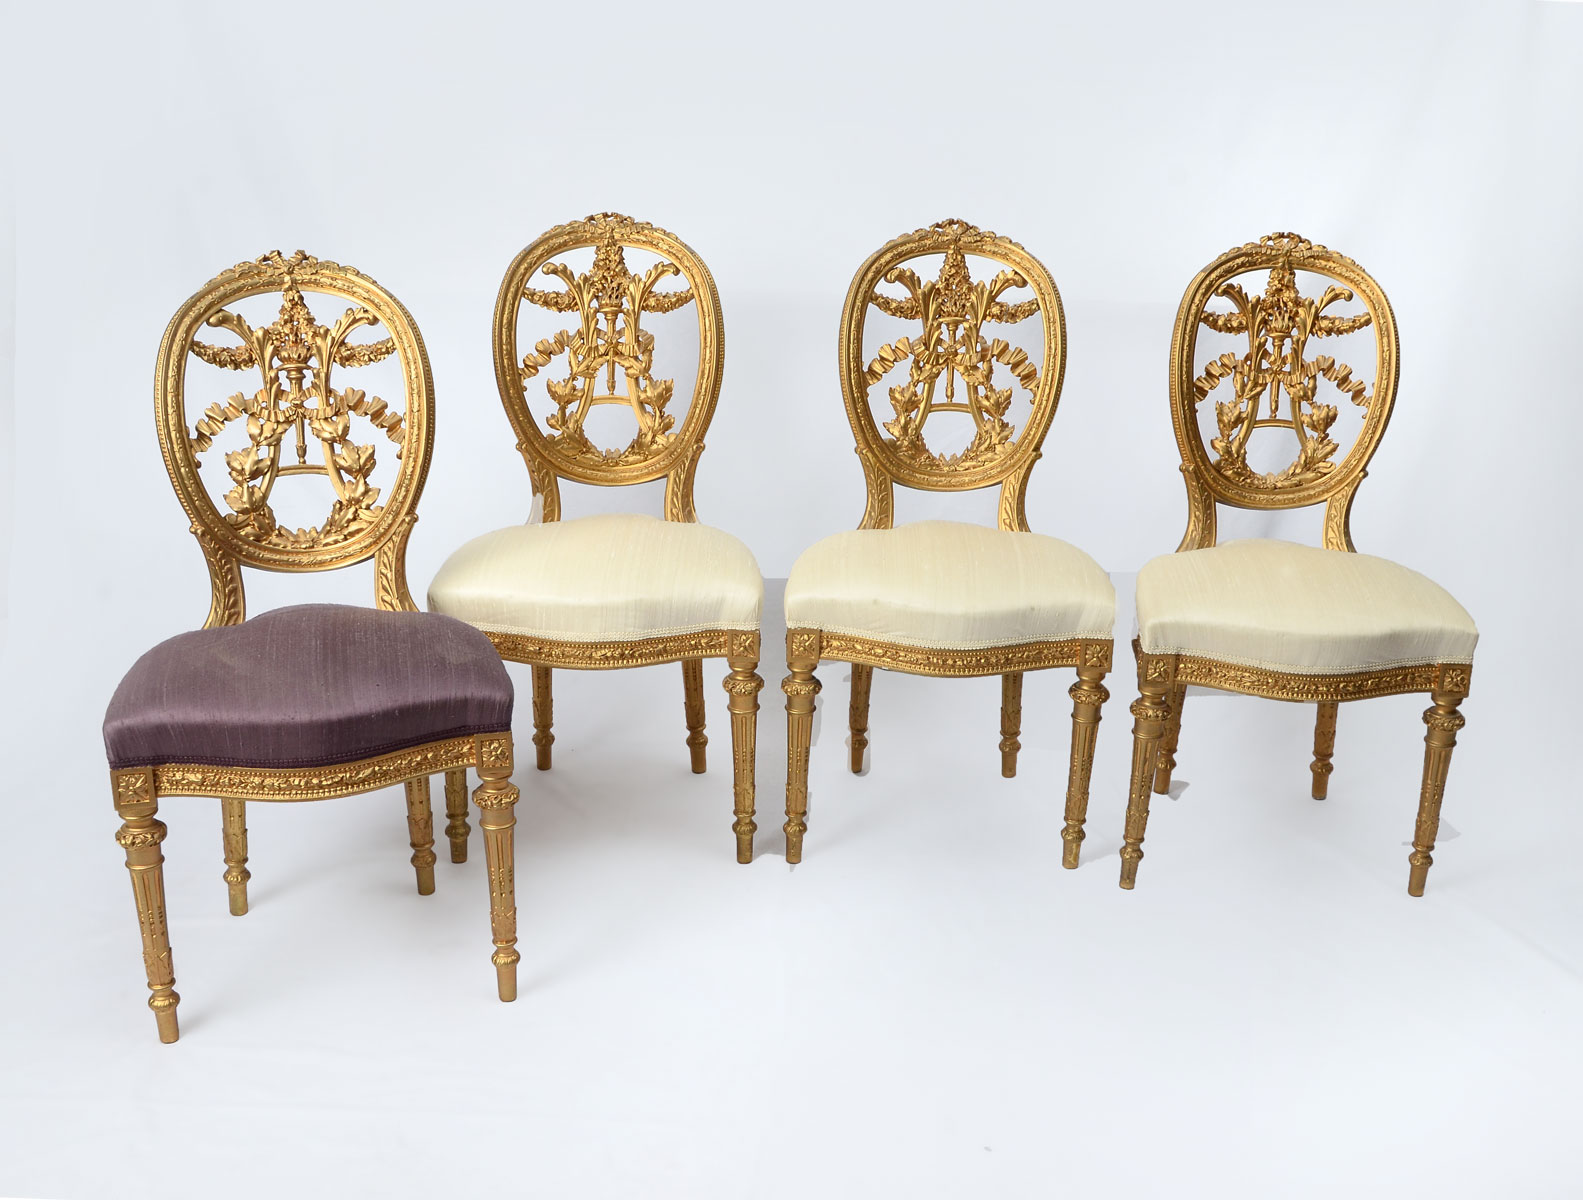 4 CARVED SALON CHAIRS 4 Parlor 36f6b8